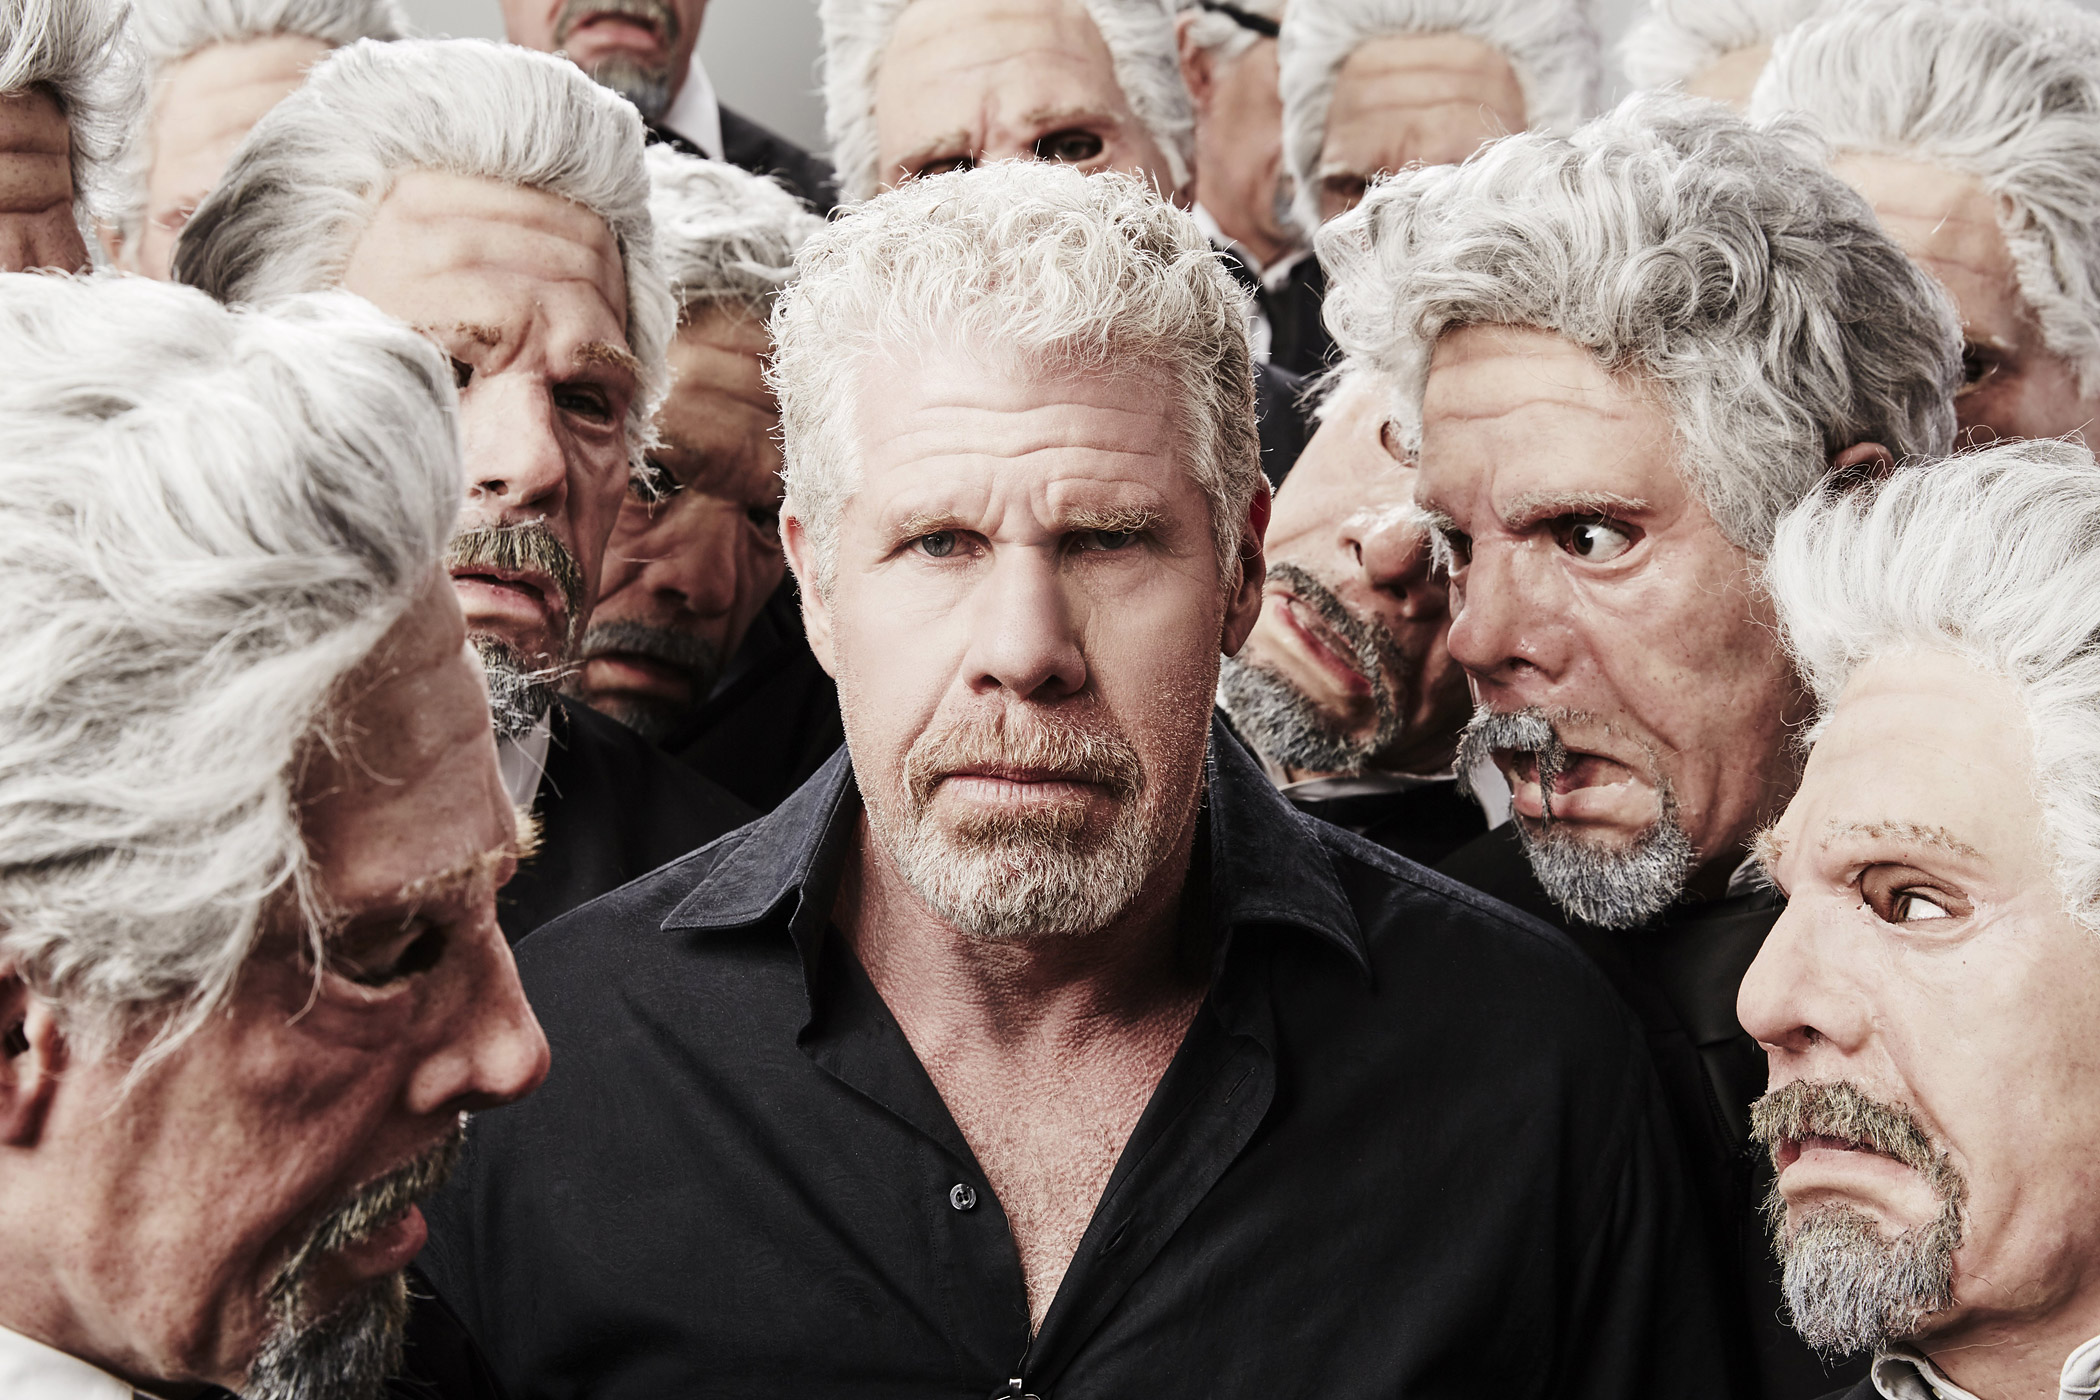 Ron Perlman poses for a portrait with Ron Perlman impersonators at the  Getty Images Portrait Studio powered by Samsung Galaxy at Comic-Con International 2015 at the Hard Rock Hotel San Diego on July 9, 2015 in San Diego, Calif. (Maarten de Boer—Getty Images)